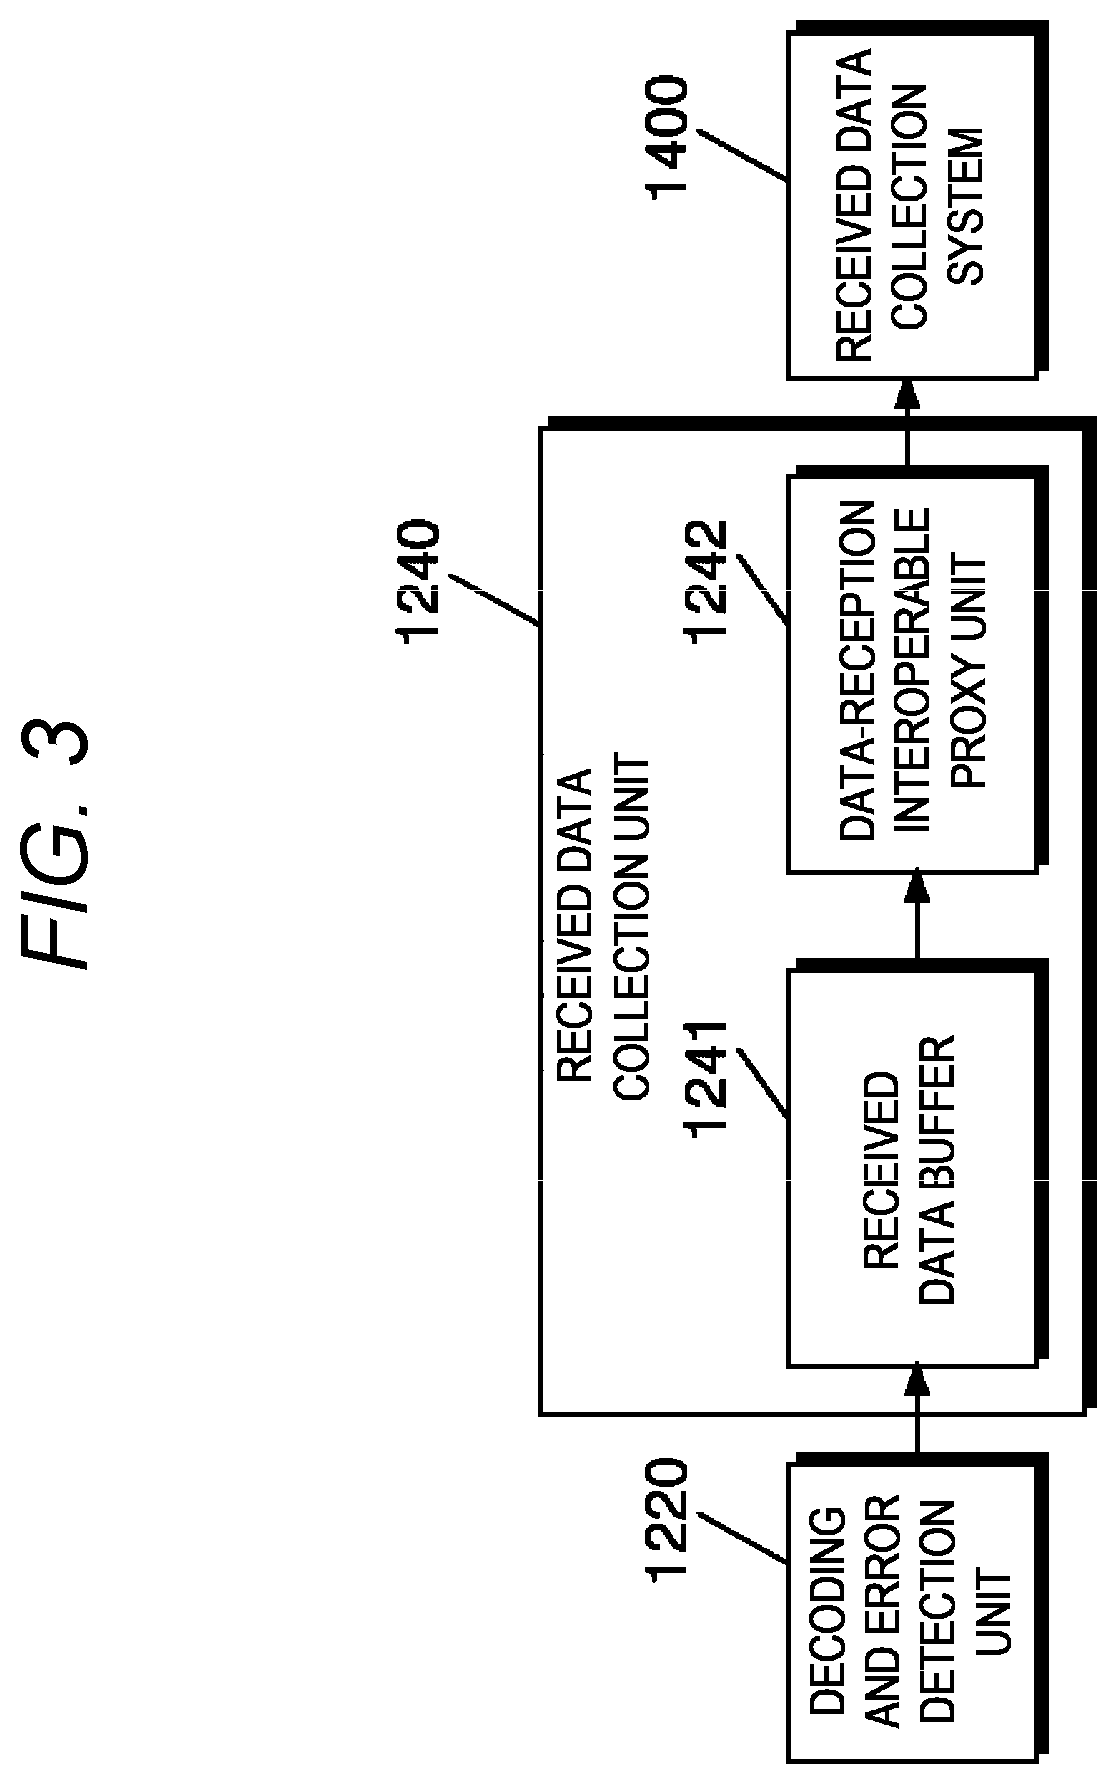 One-direction data transmission/reception apparatus that re-transmits data via plurality of communication lines, and data transmission method using same